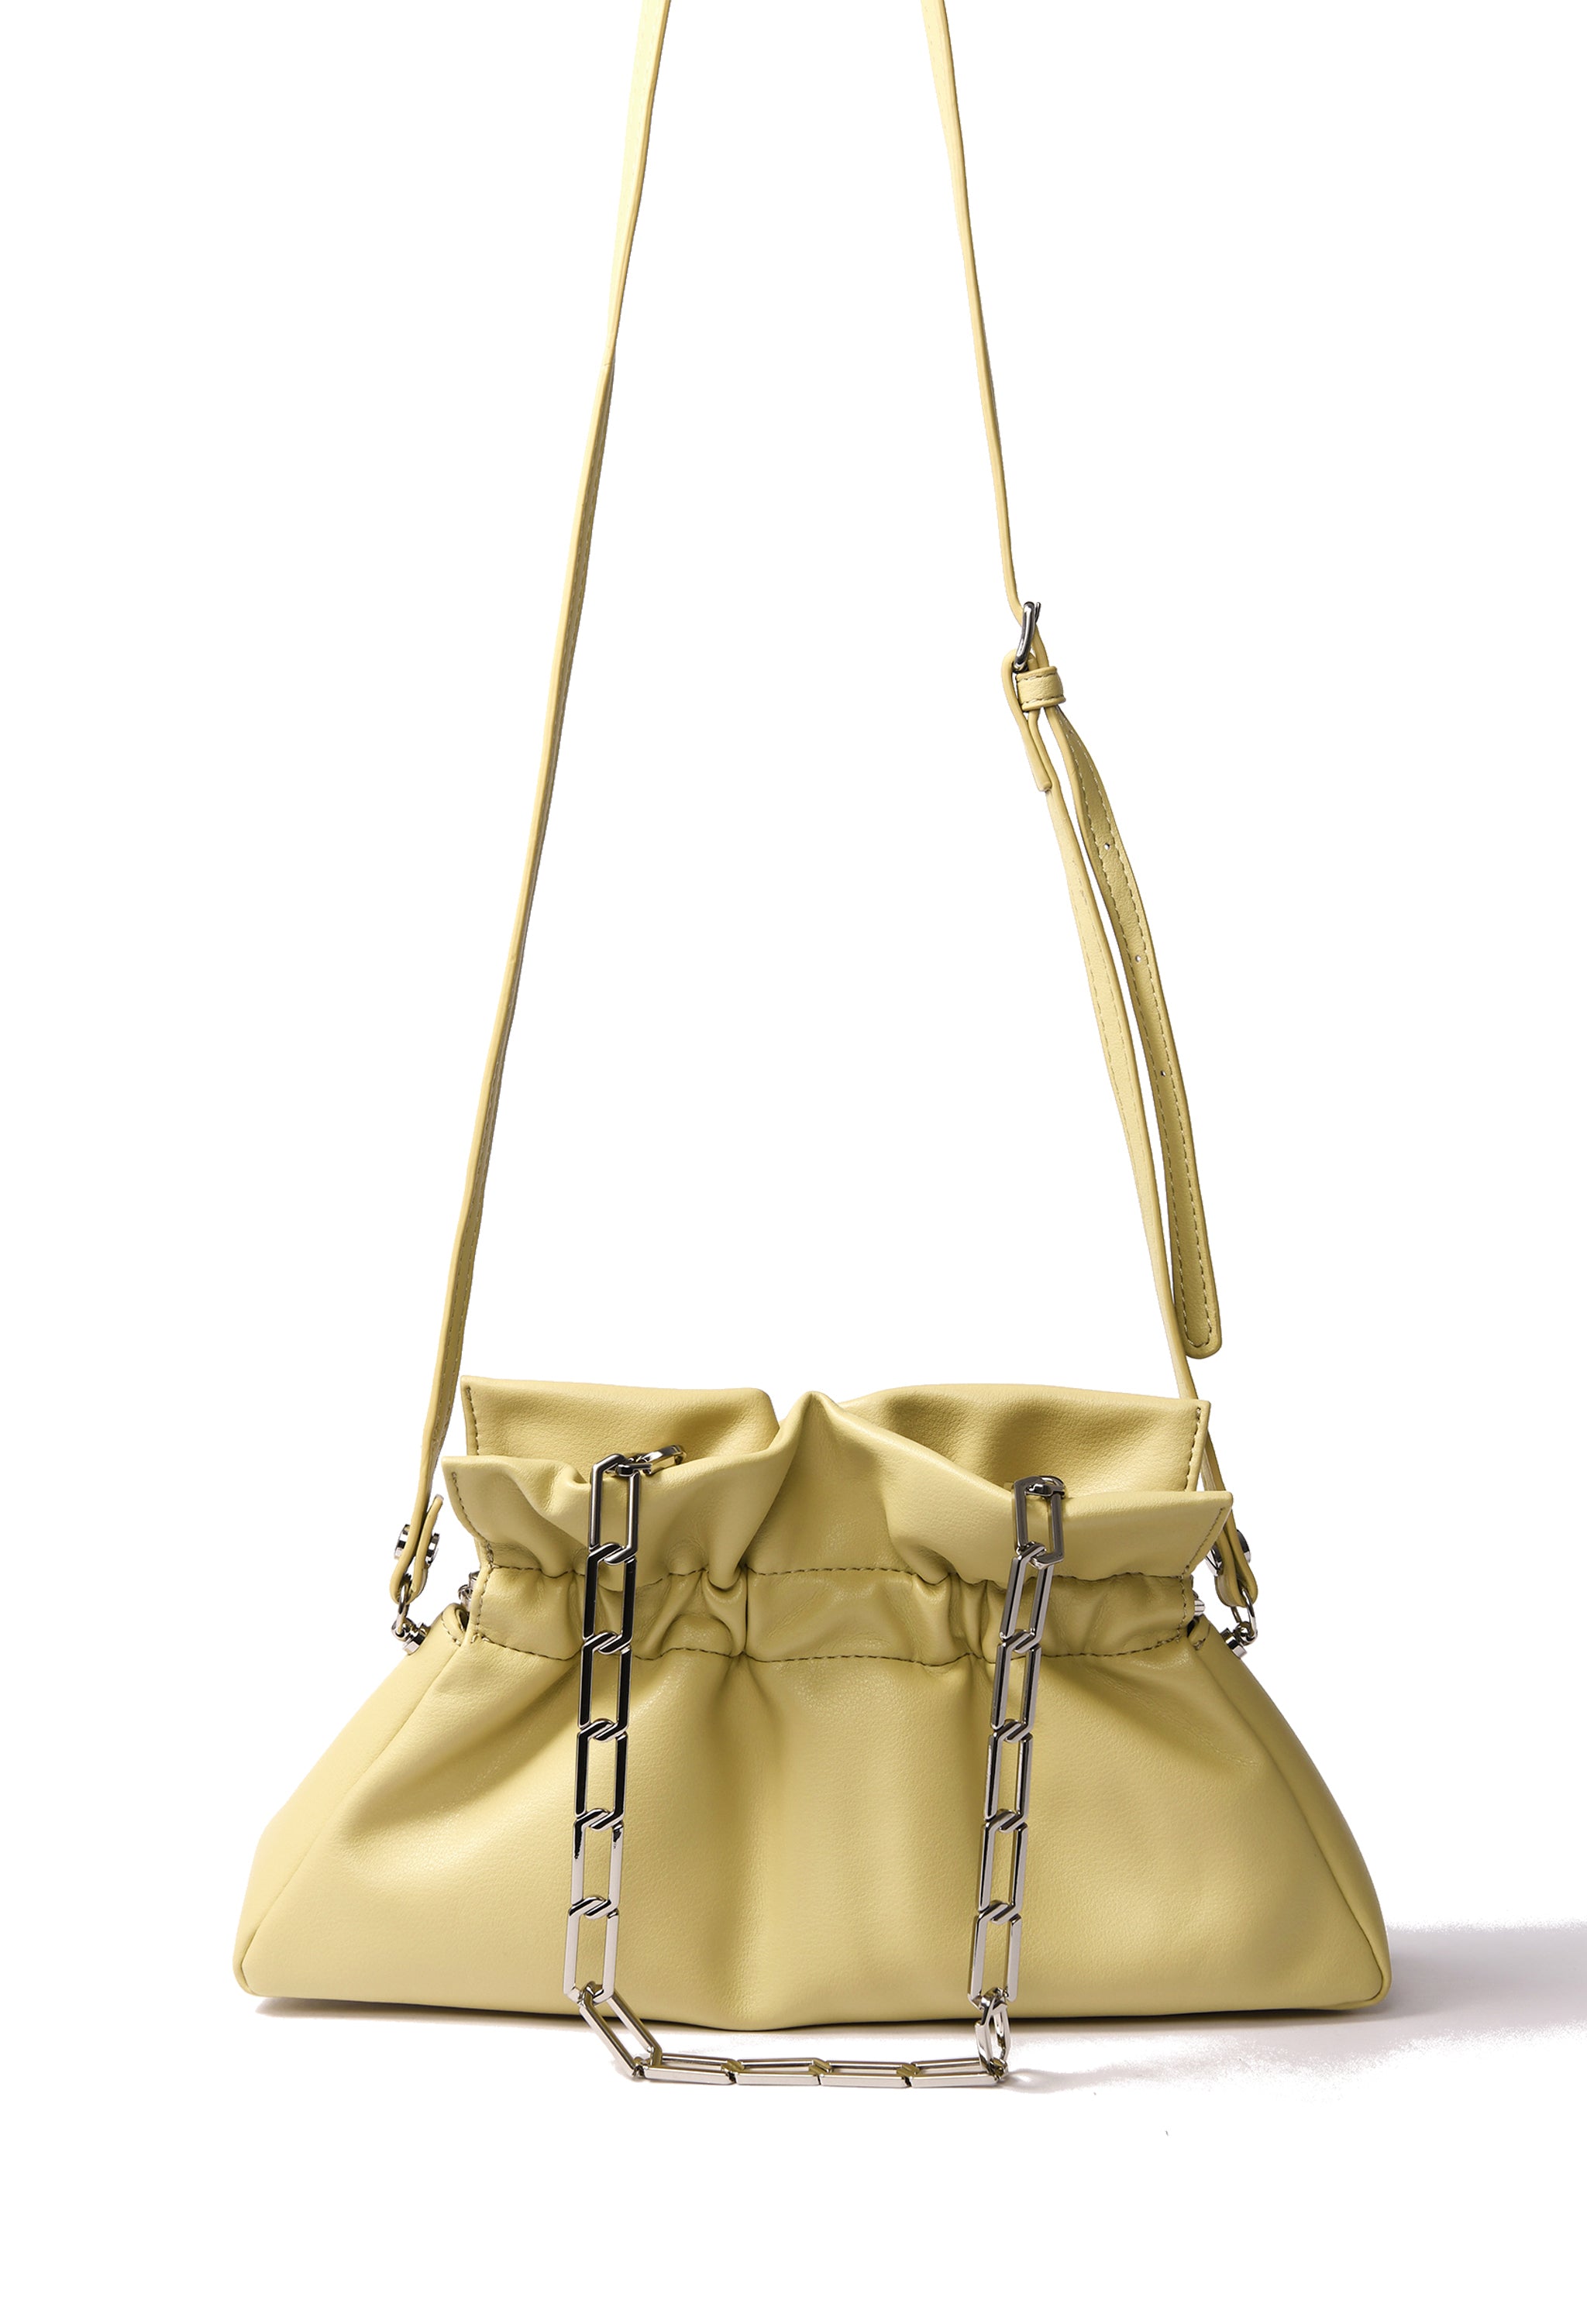 Mila Bag in smooth leather, Yellow BOB ORE blue collection on sale 2022